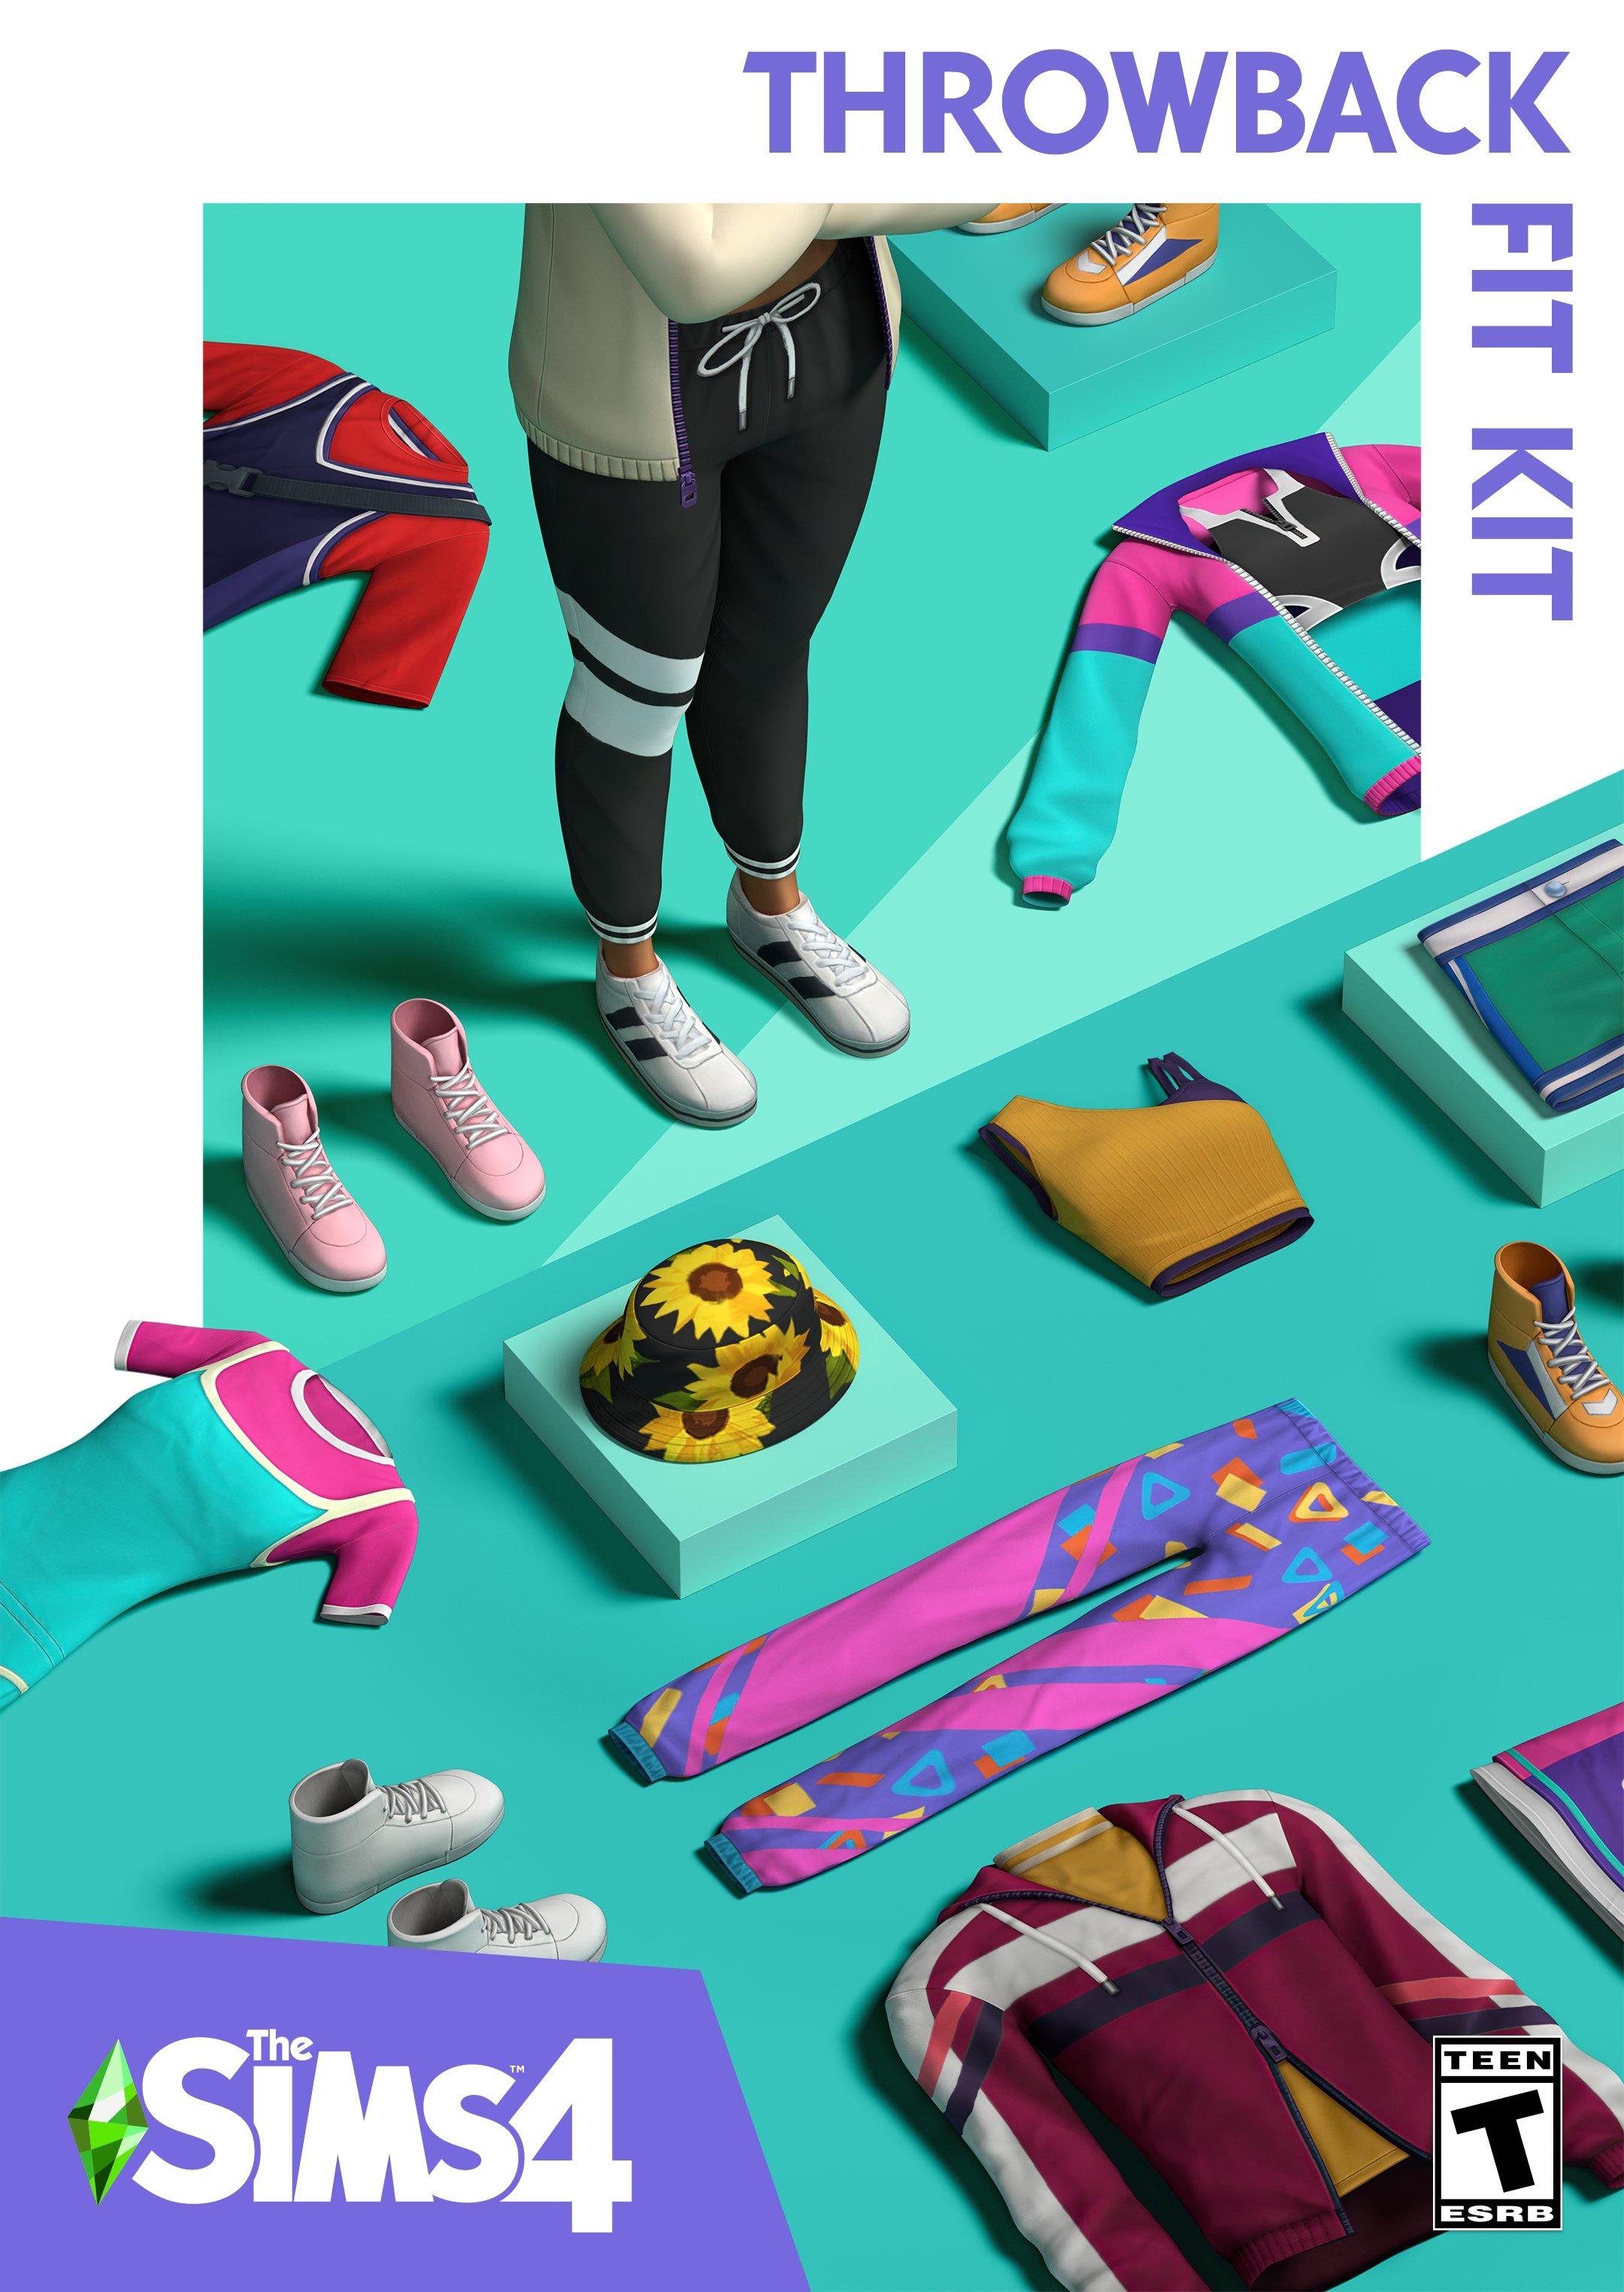 The Sims 4: Throwback Fit Kit DLC